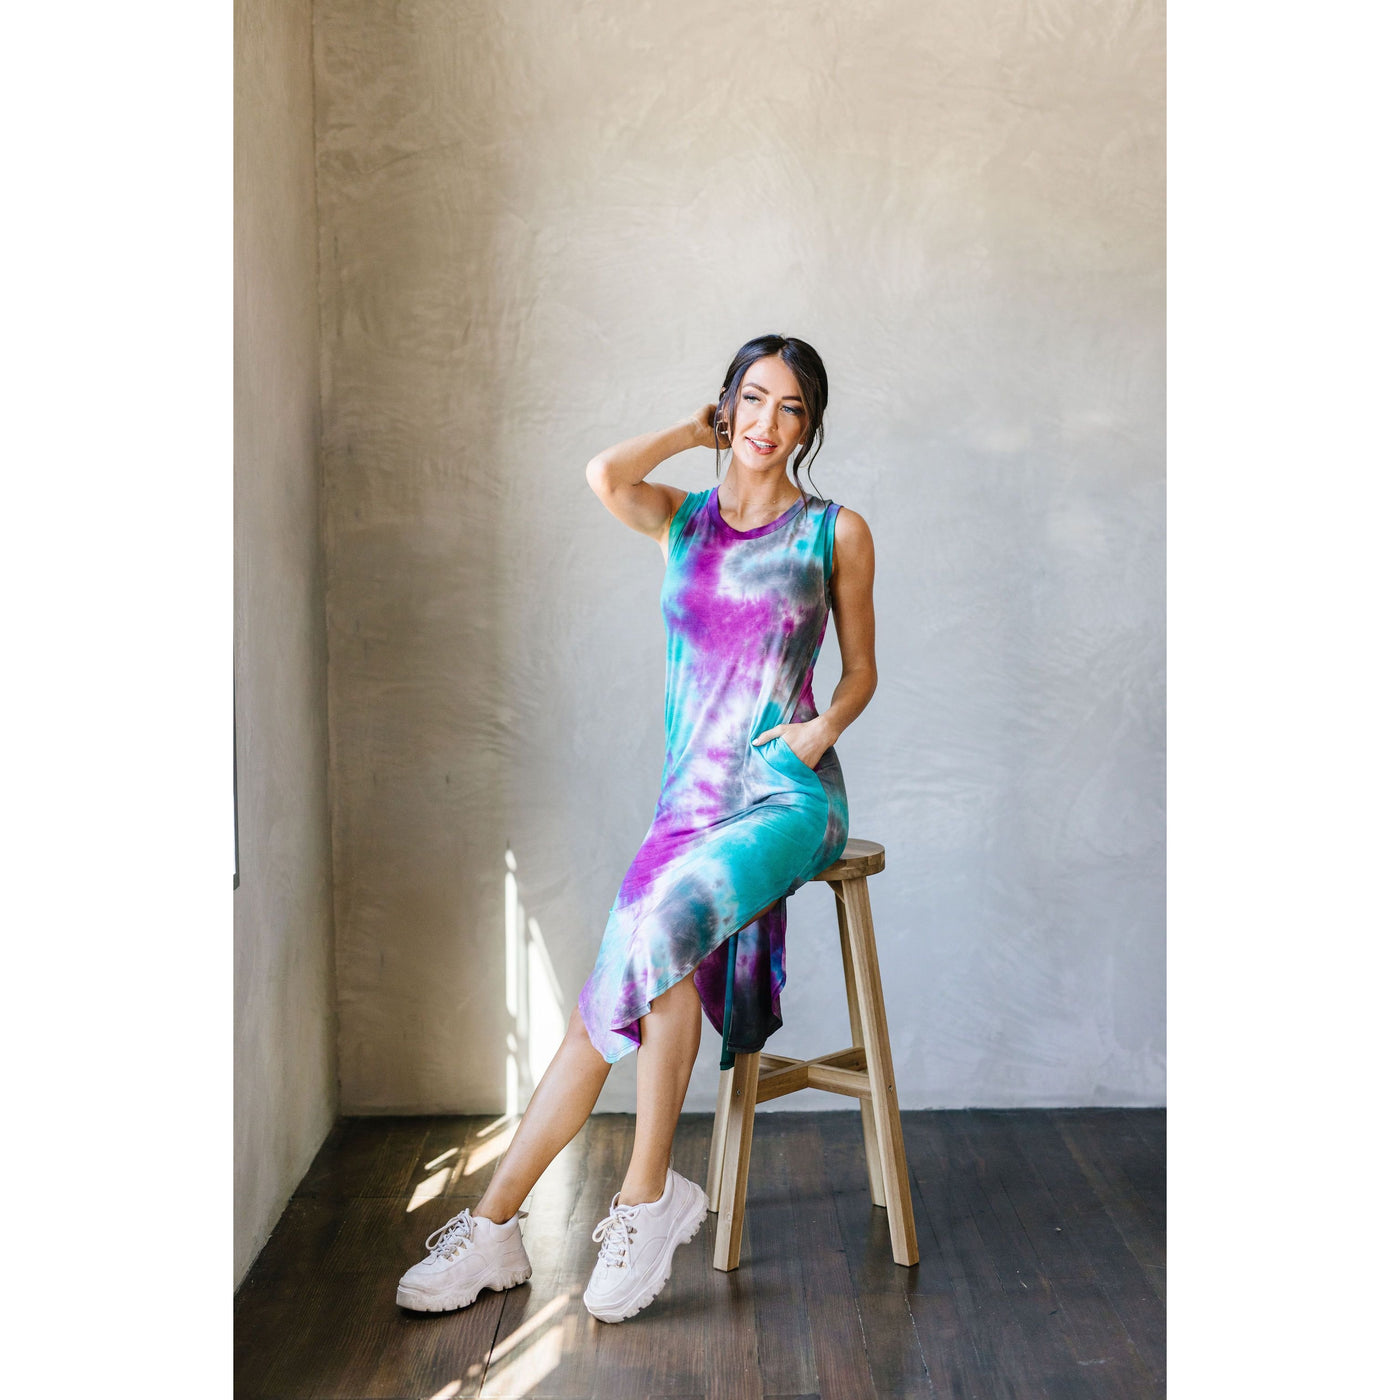 Cool Vibes Tie Dye Midi Dress-W Dress-Graceful & Chic Boutique, Family Clothing Store in Waxahachie, Texas